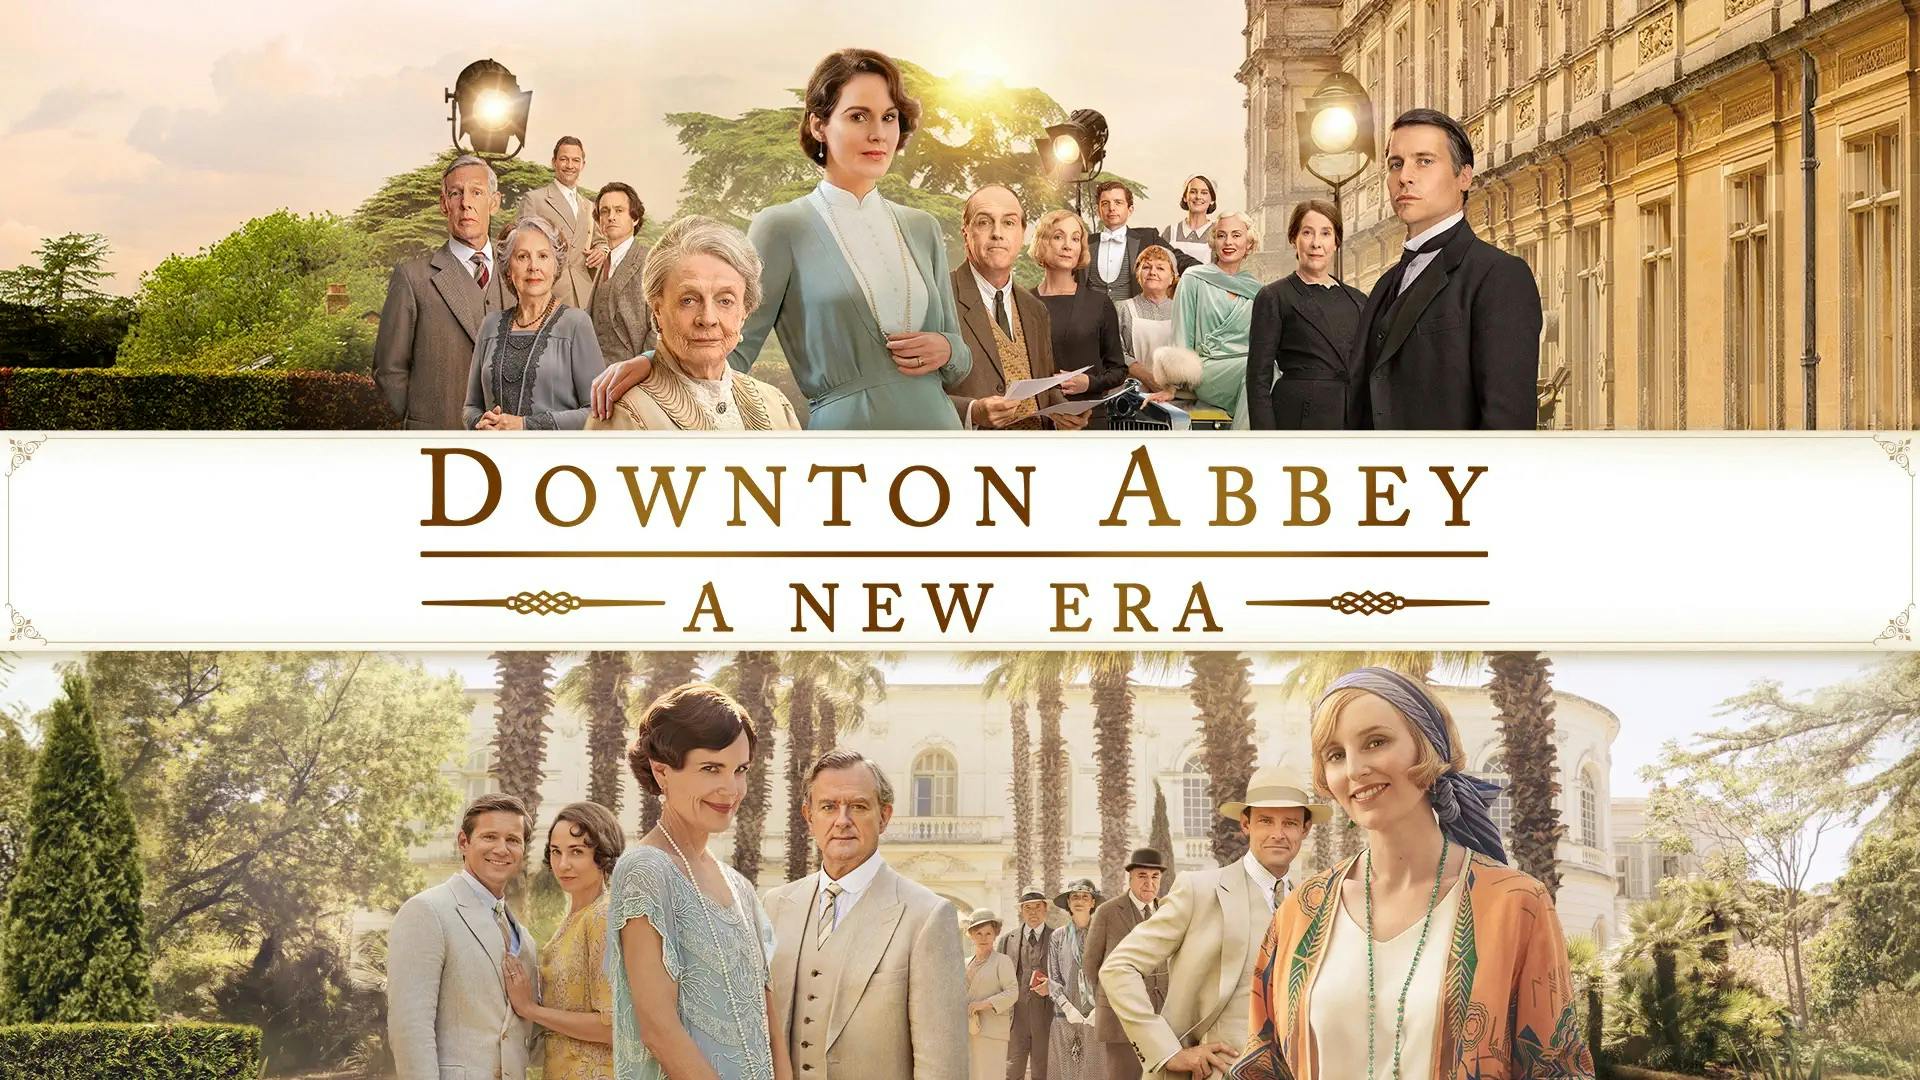 The thumbnail cover for the movie Downton Abbey a New Era